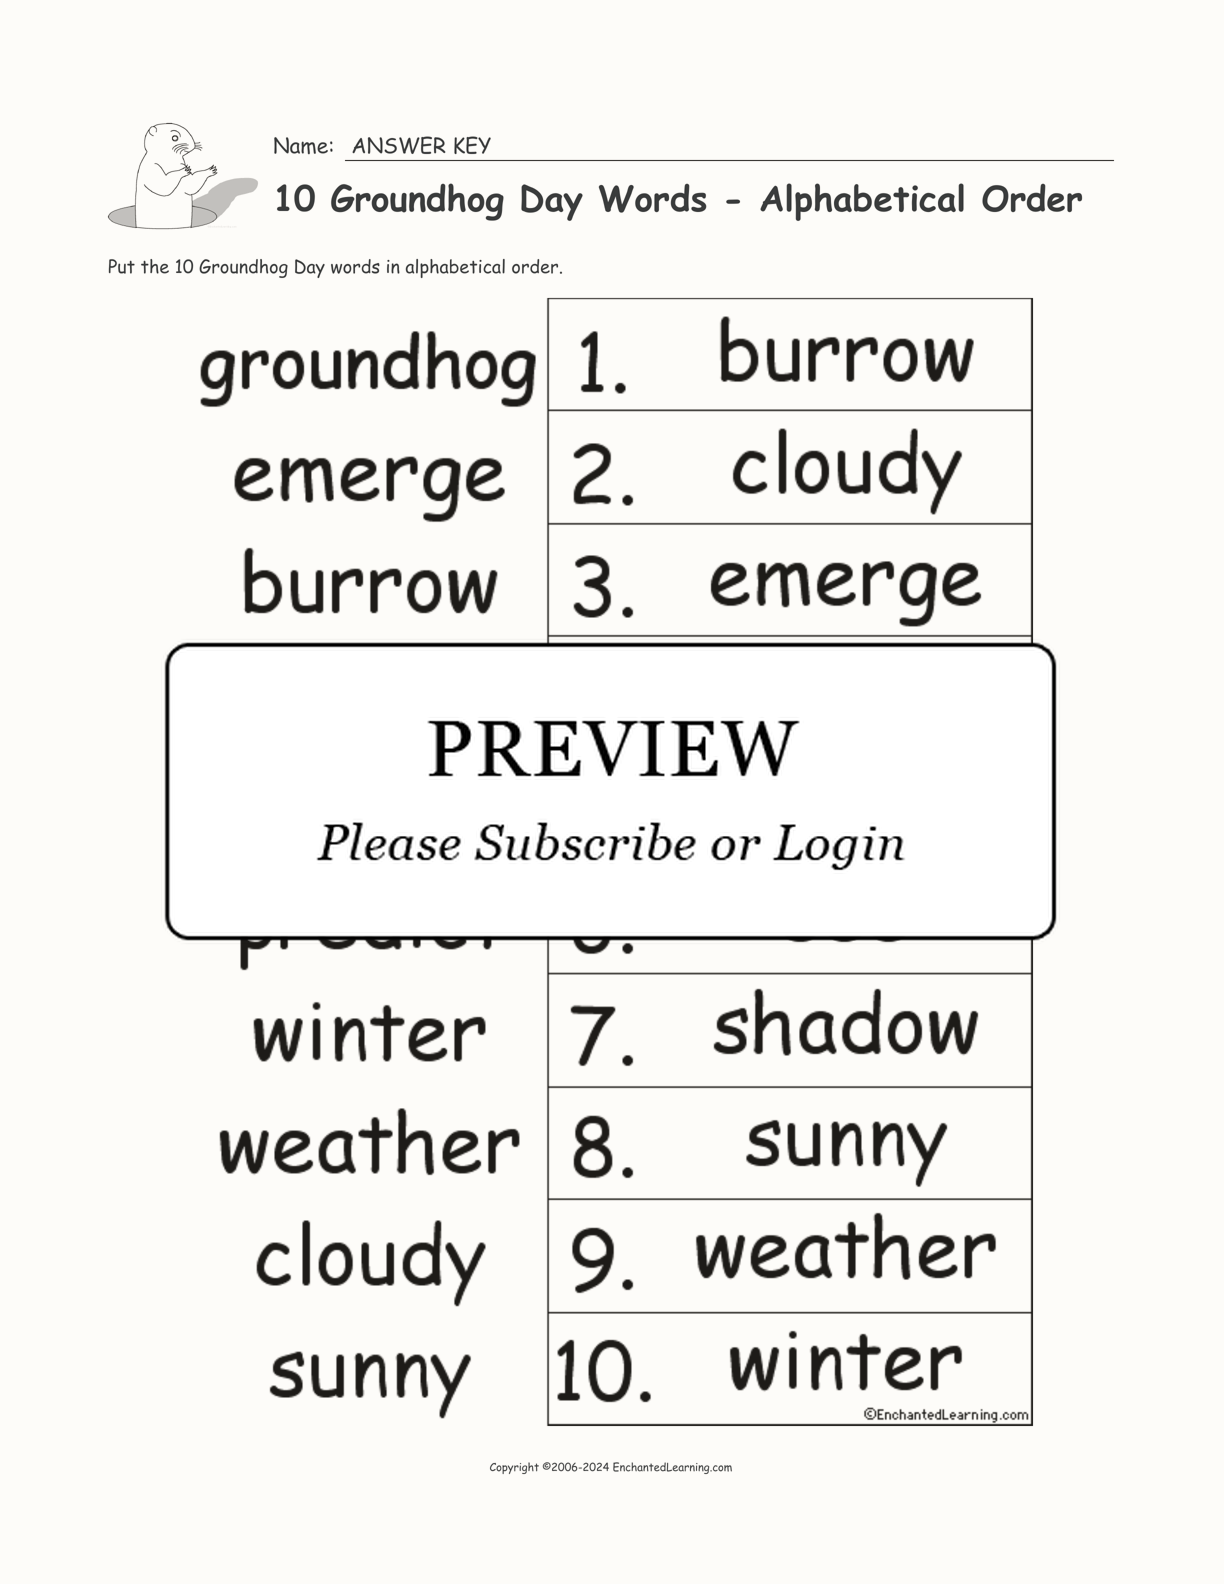 10 Groundhog Day Words - Alphabetical Order interactive worksheet page 2